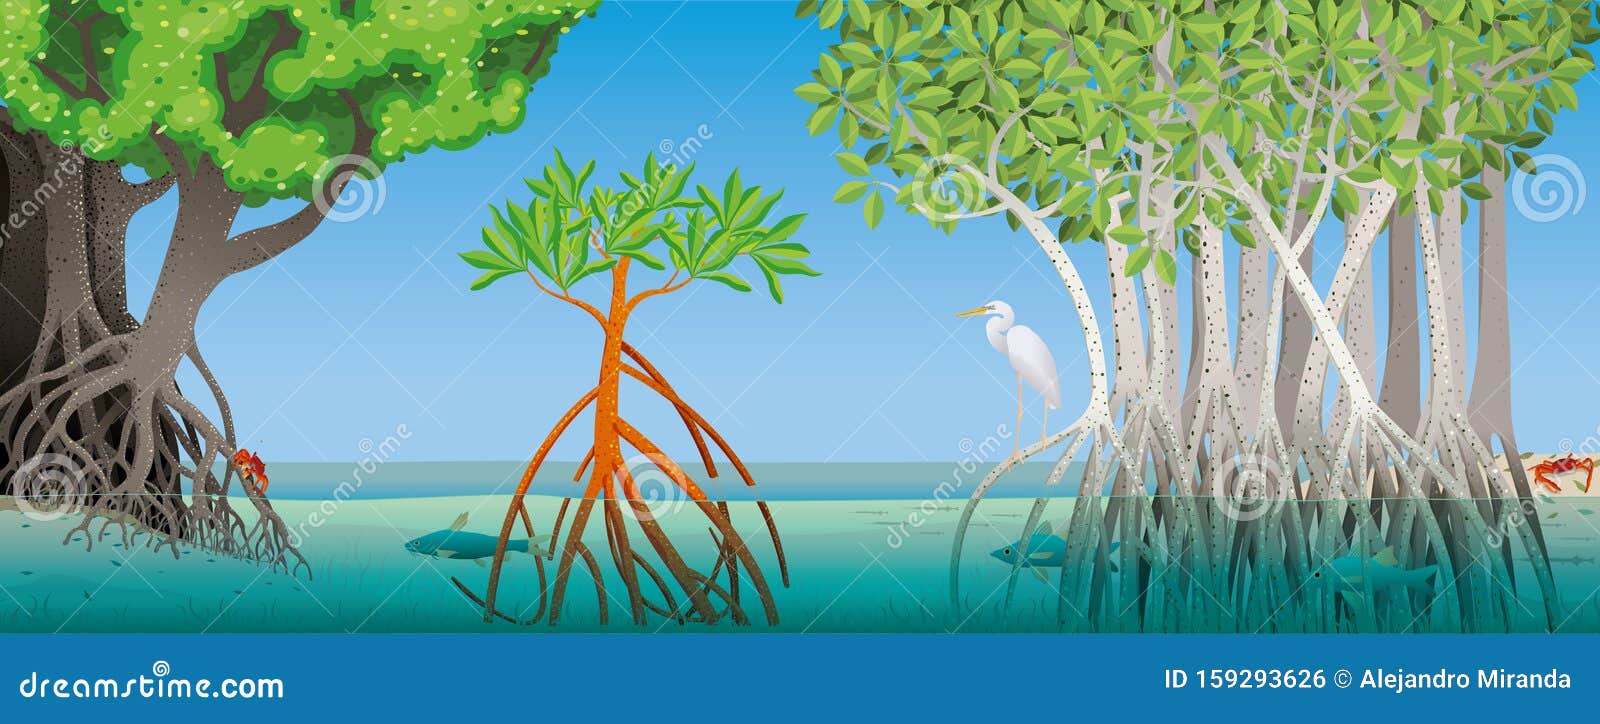 drawing of three different types of mangrove with underwater roots with fish, crabs and a white heron in the scene.  image